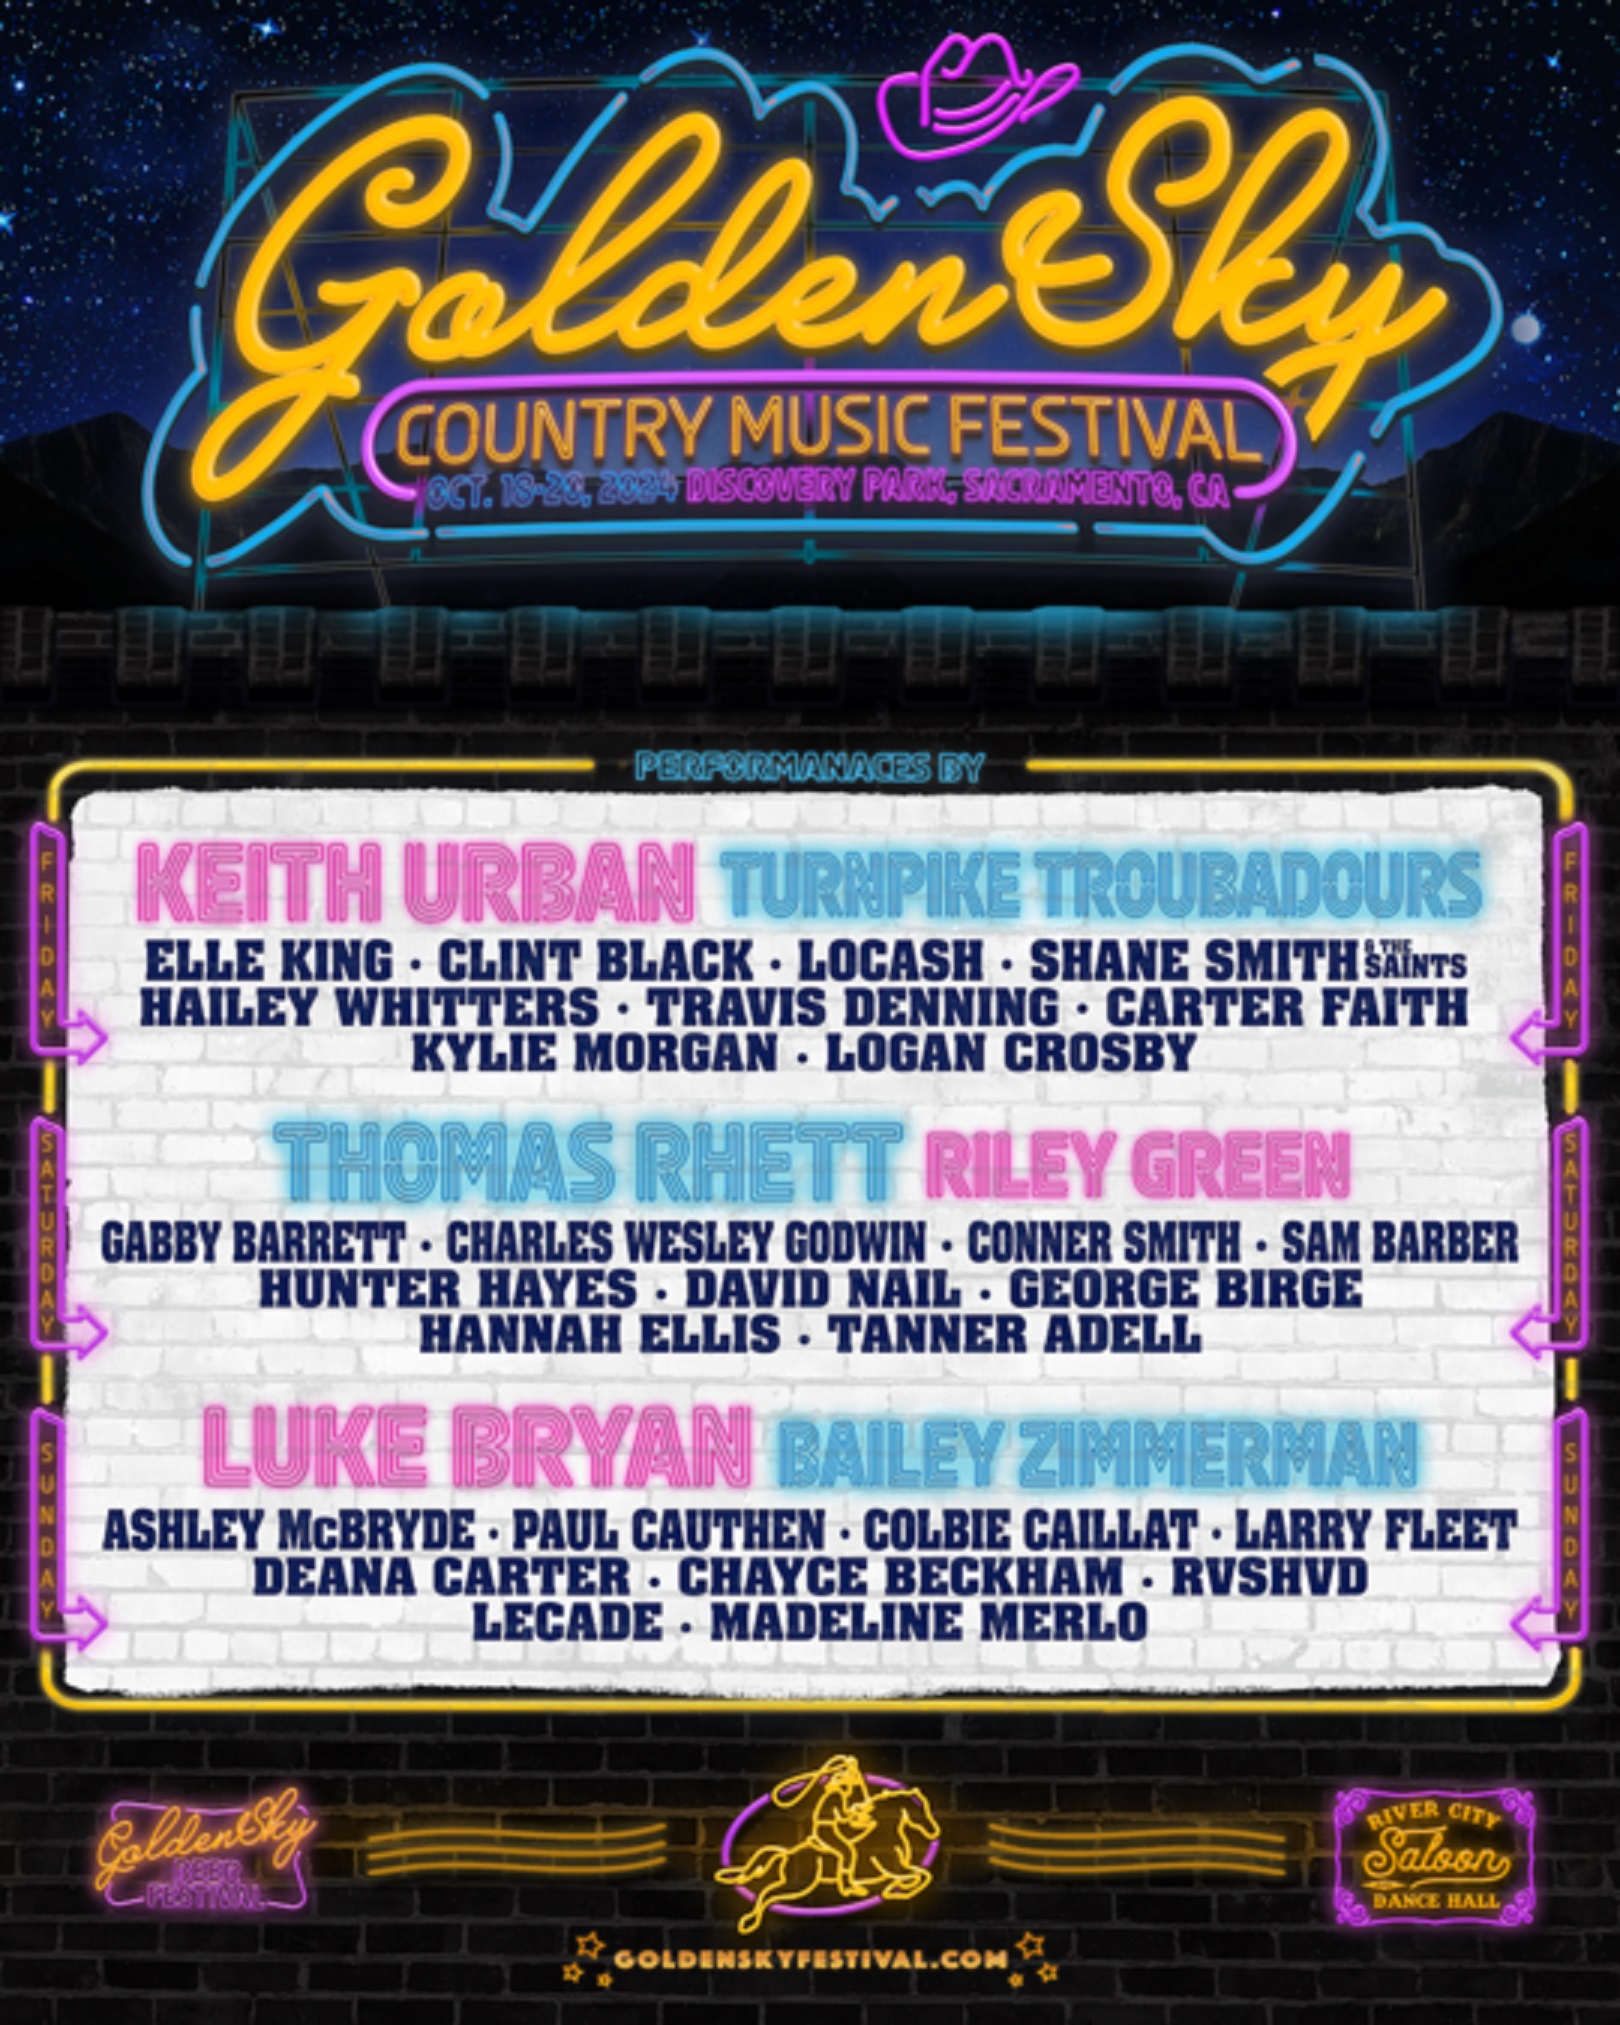 GoldenSky Country Music Festival Expands To 3 Days (Oct. 18-20) At Discovery Park In Sacramento, CA